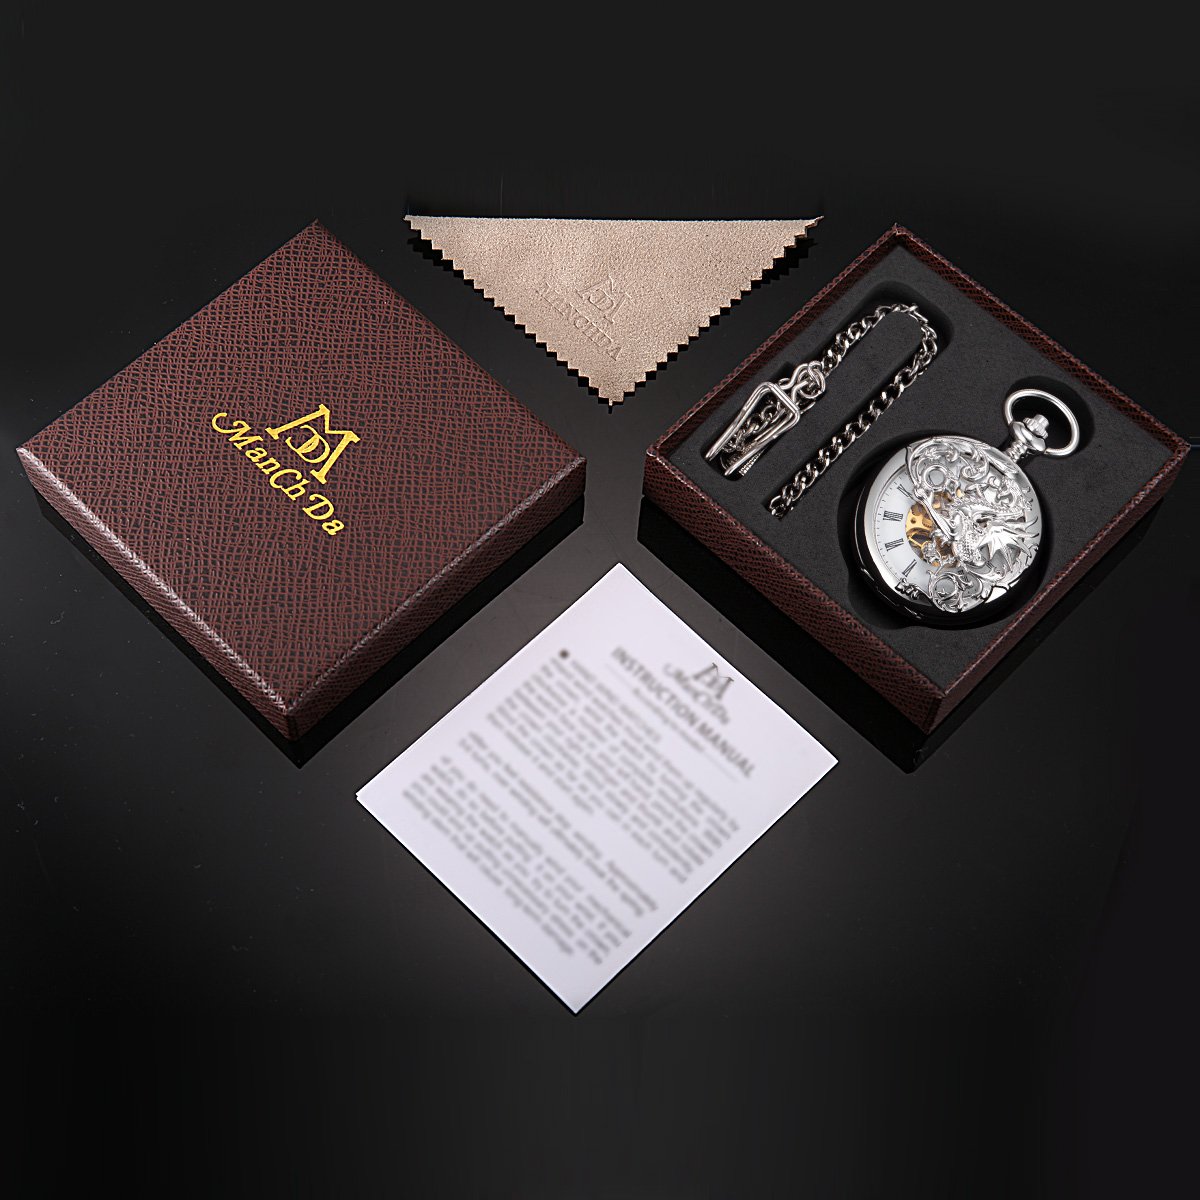 Mens Skeleton Mechanical Pocket Watch - Dragon Hollow Double Hunter Black Roman Numerals White Dial with Chain + Gift Box